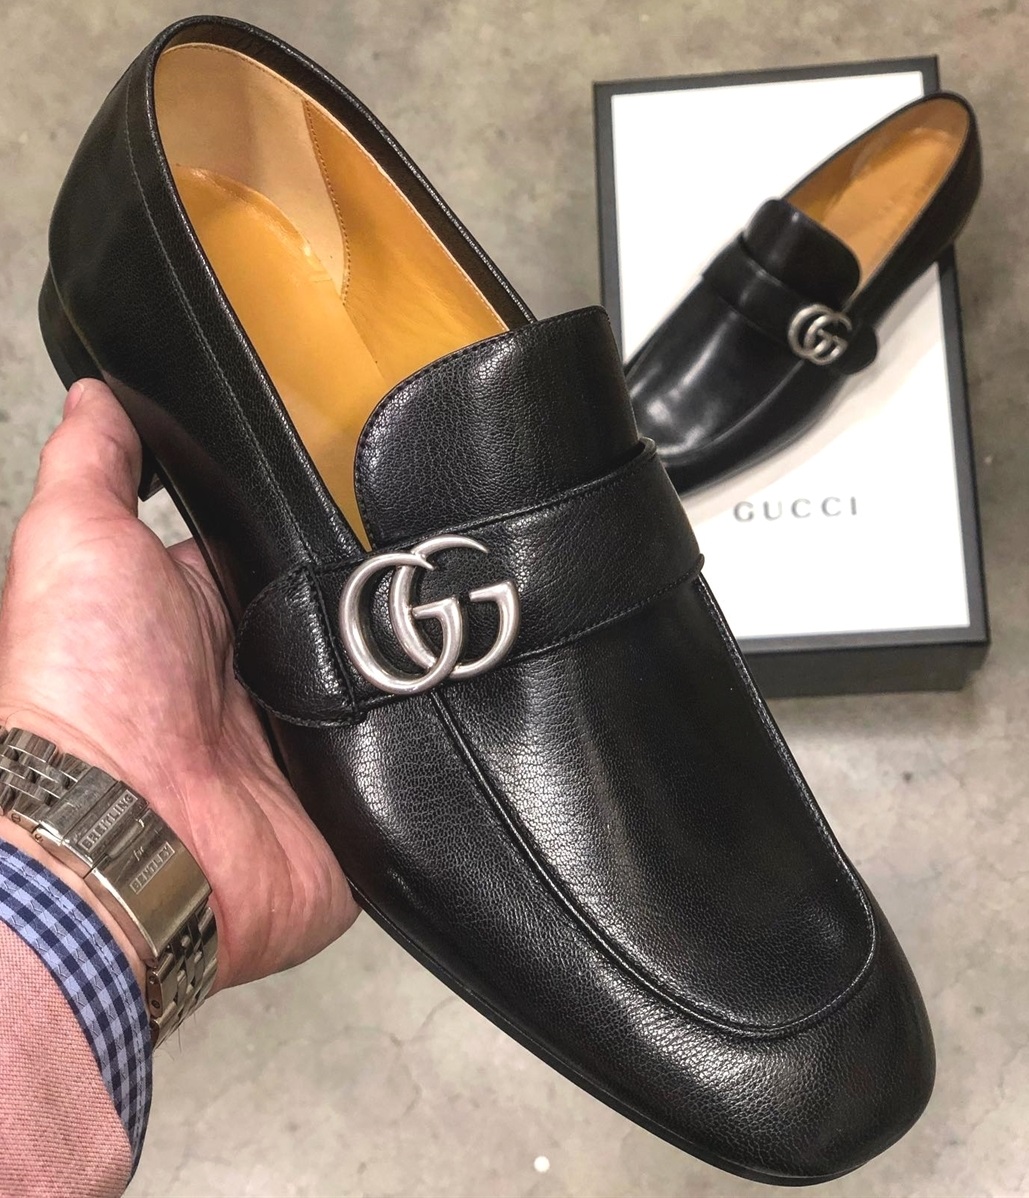 Gucci loafers in black color being a must-have product